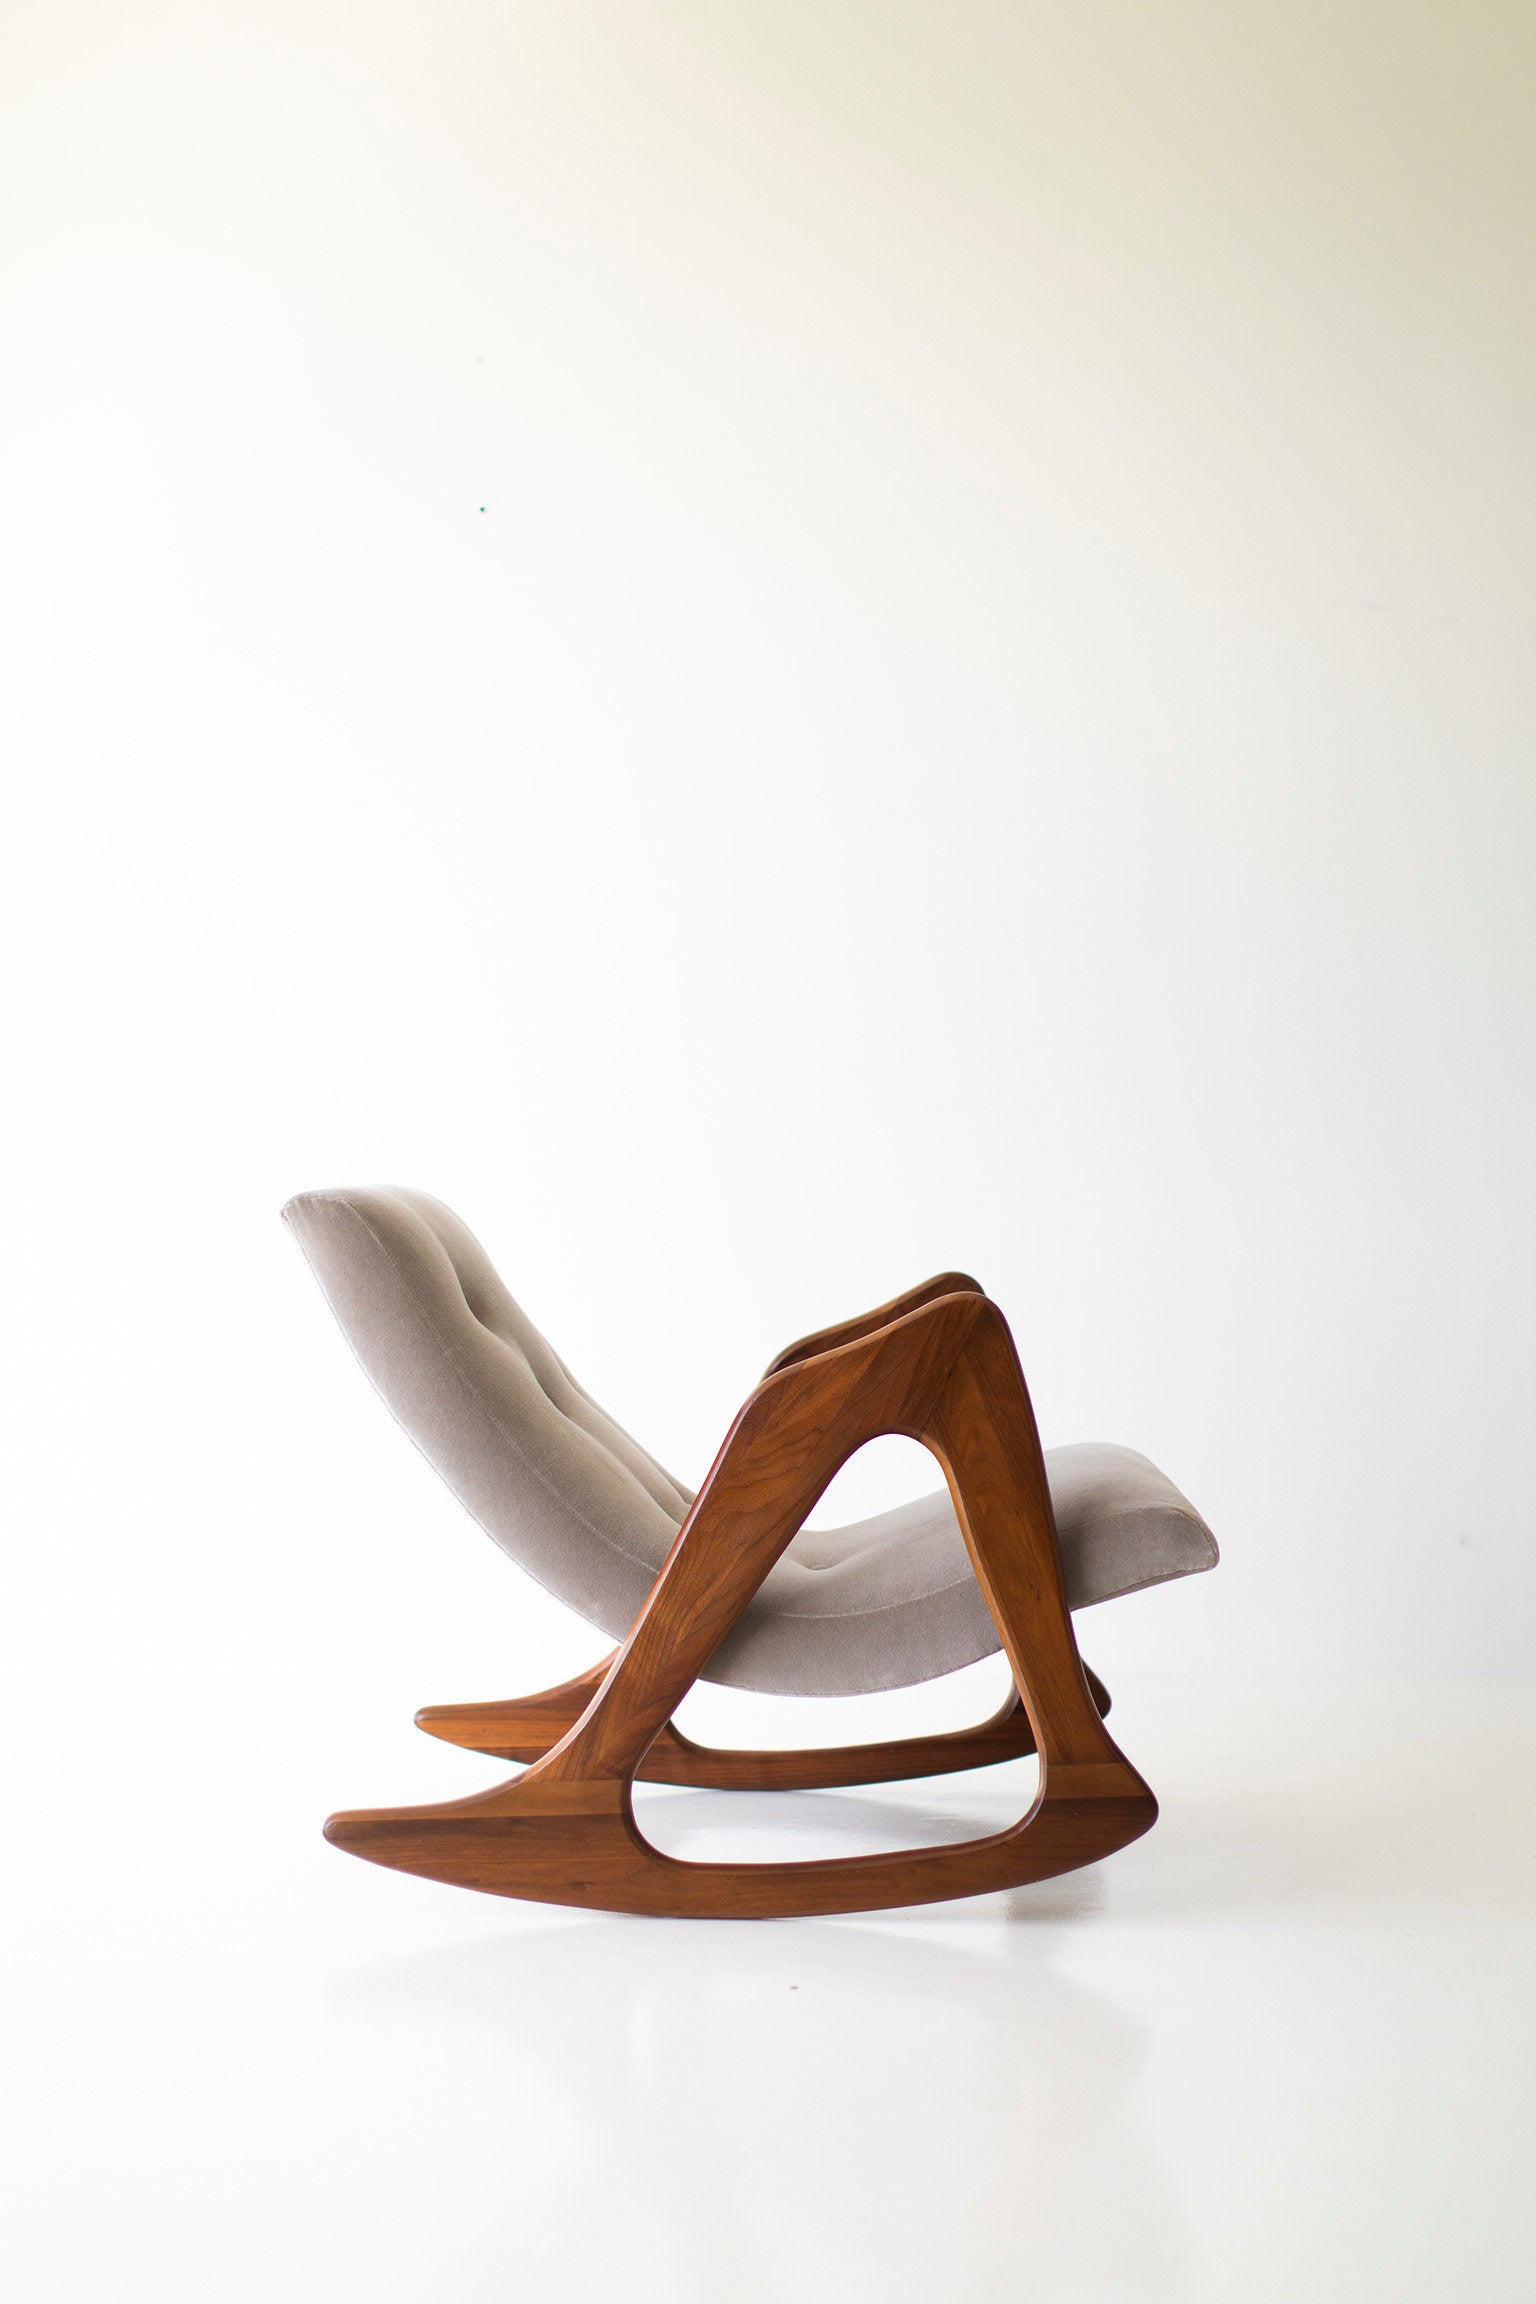 Adrian Pearsall Rocking Chair for Craft Associates Inc. - 09201801